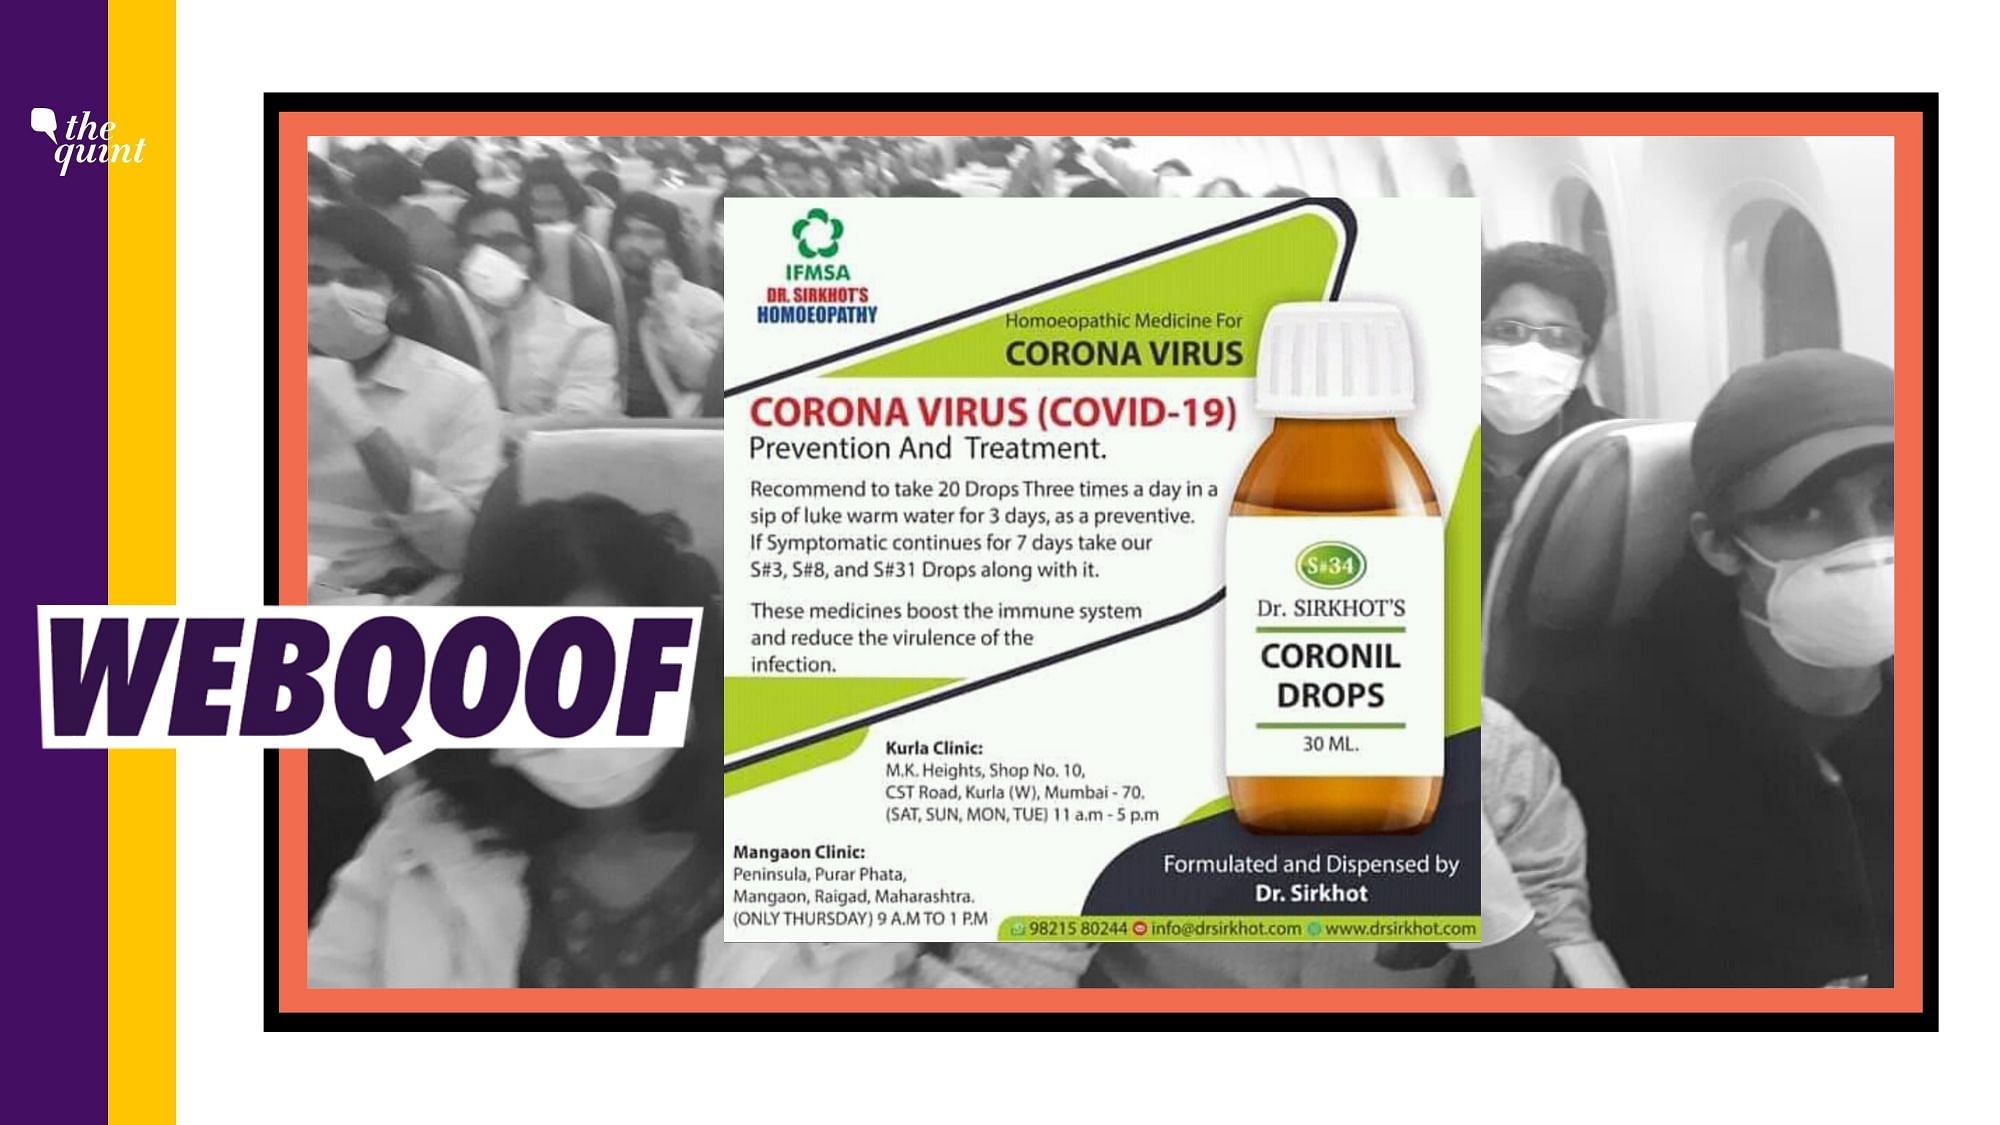 An image is being circulated on social media with a claim that homeopathic medicine ‘Coronil Drops’ developed by Dr Sirkhot’s is effective in prevention of coronavirus.